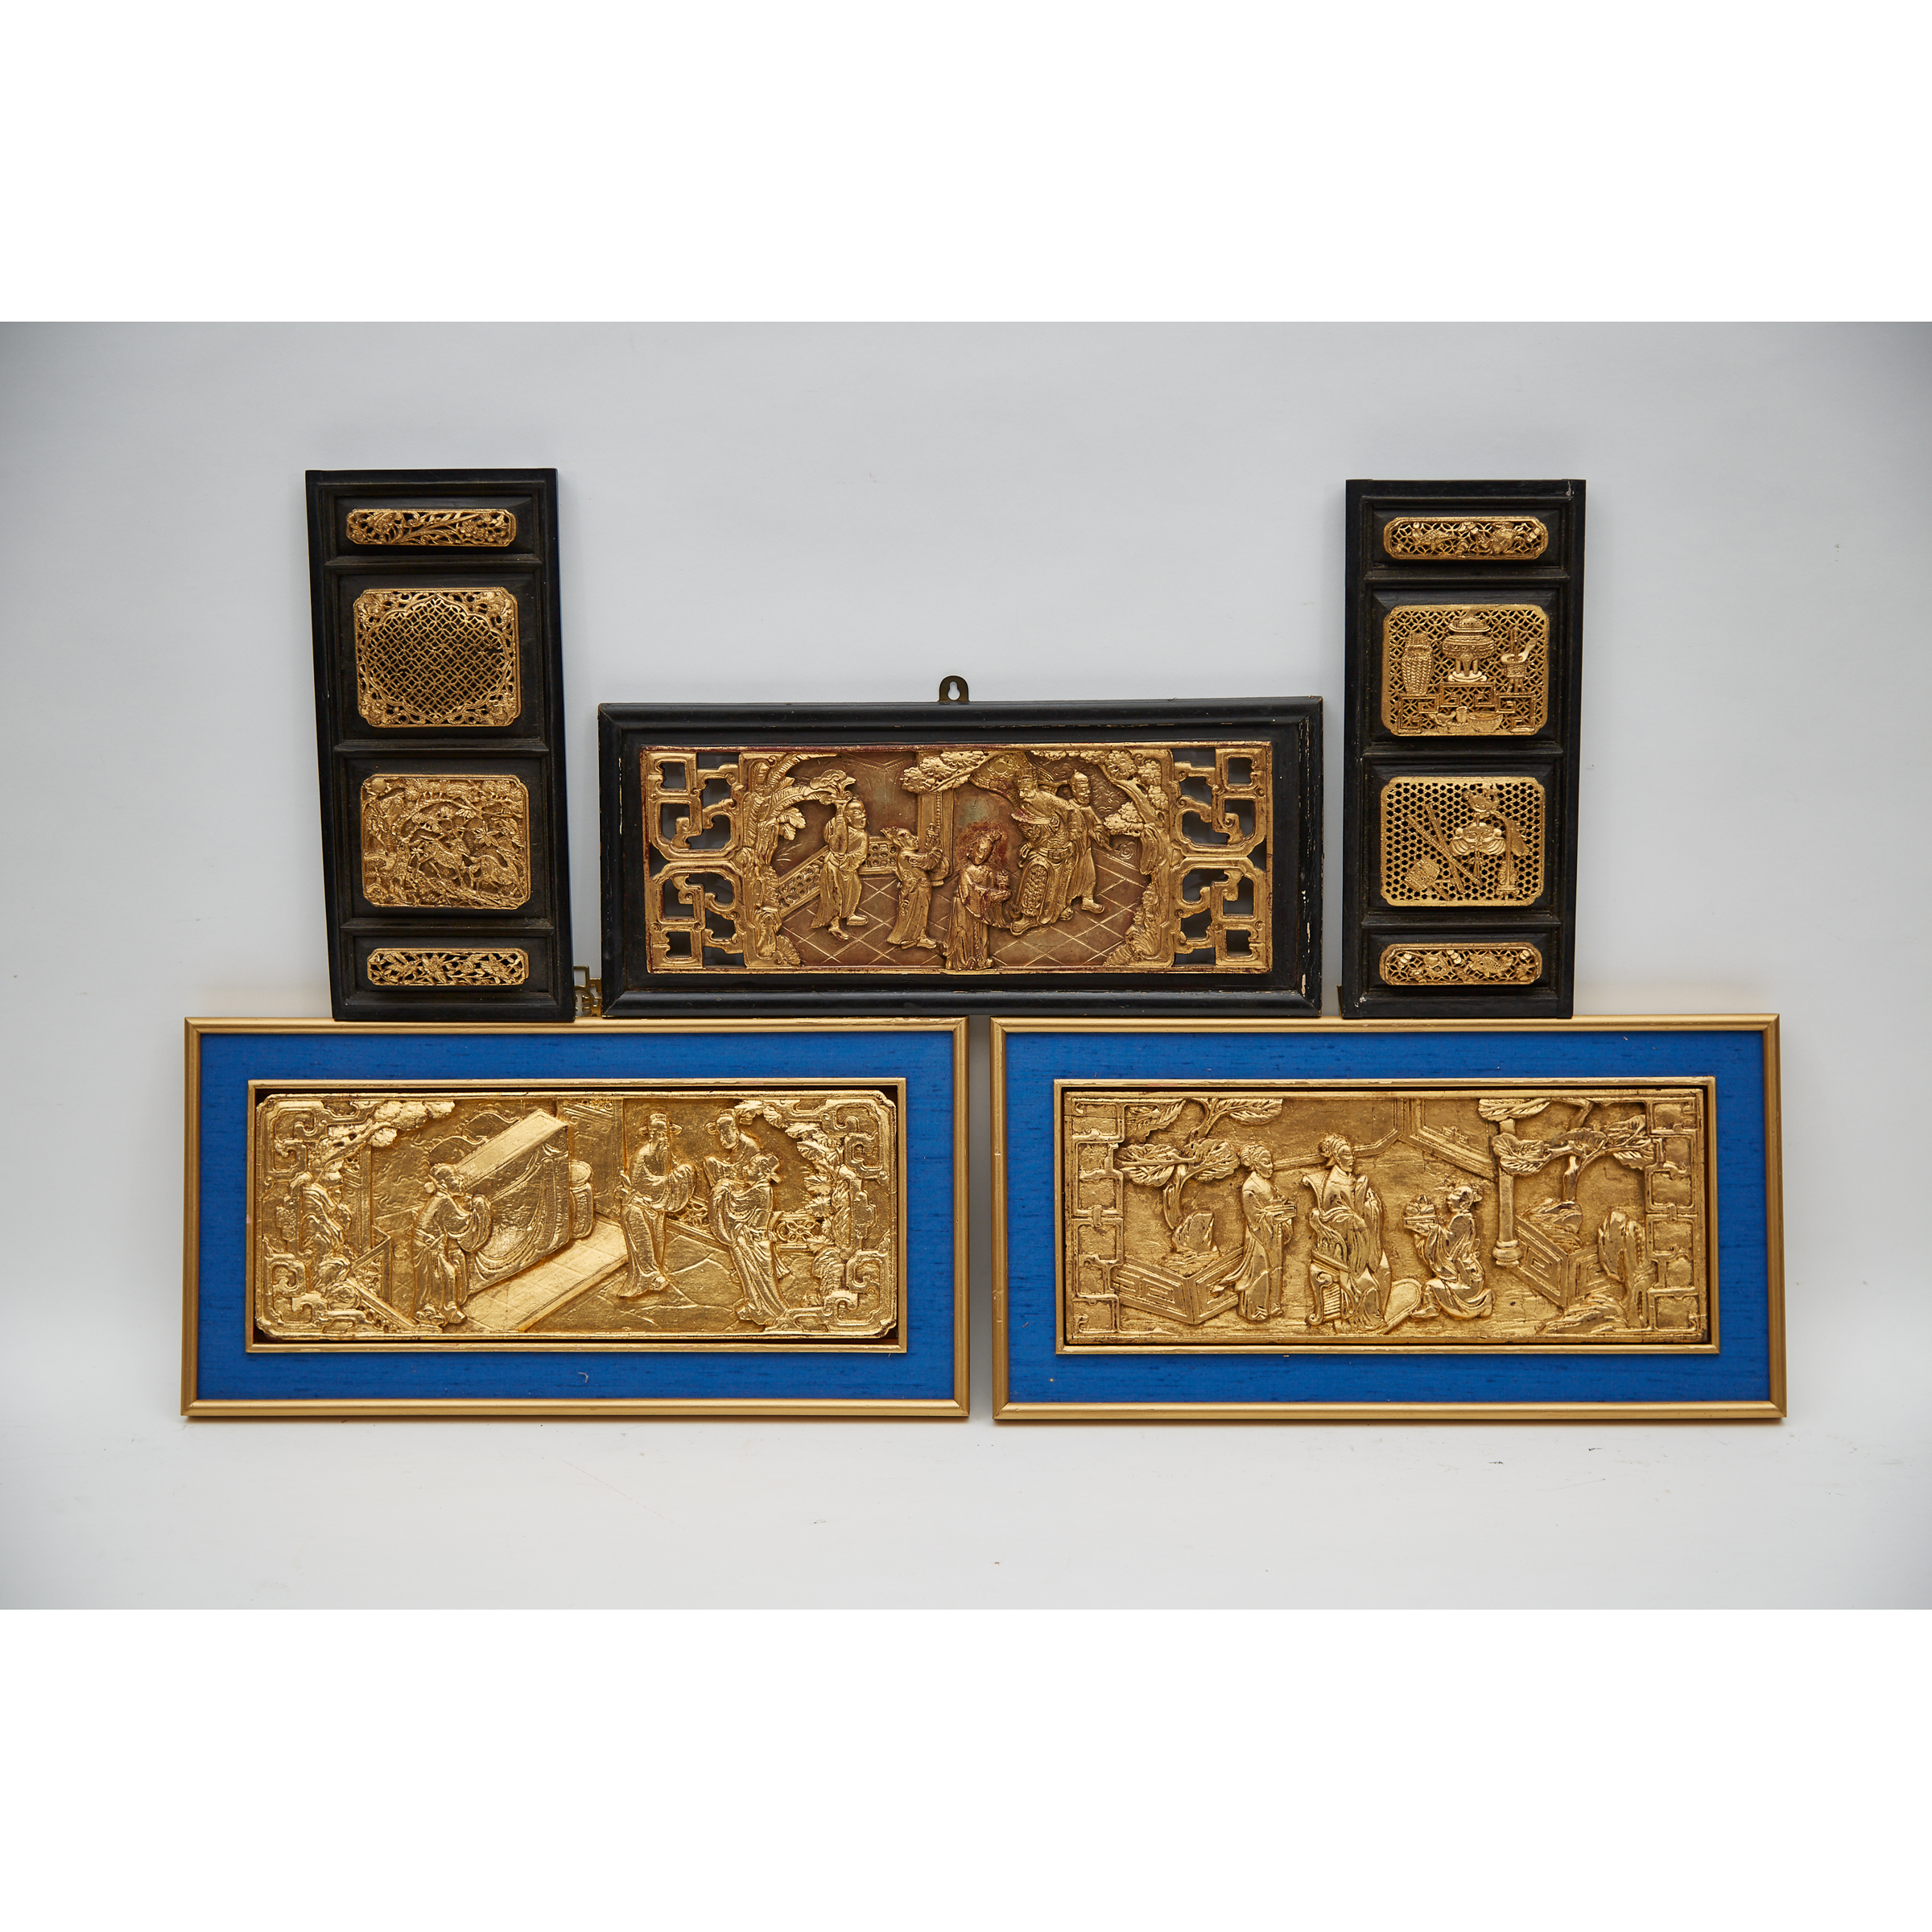 A Group of Five Chinese Gilt Wood Temple Carvings, Early 20th Century